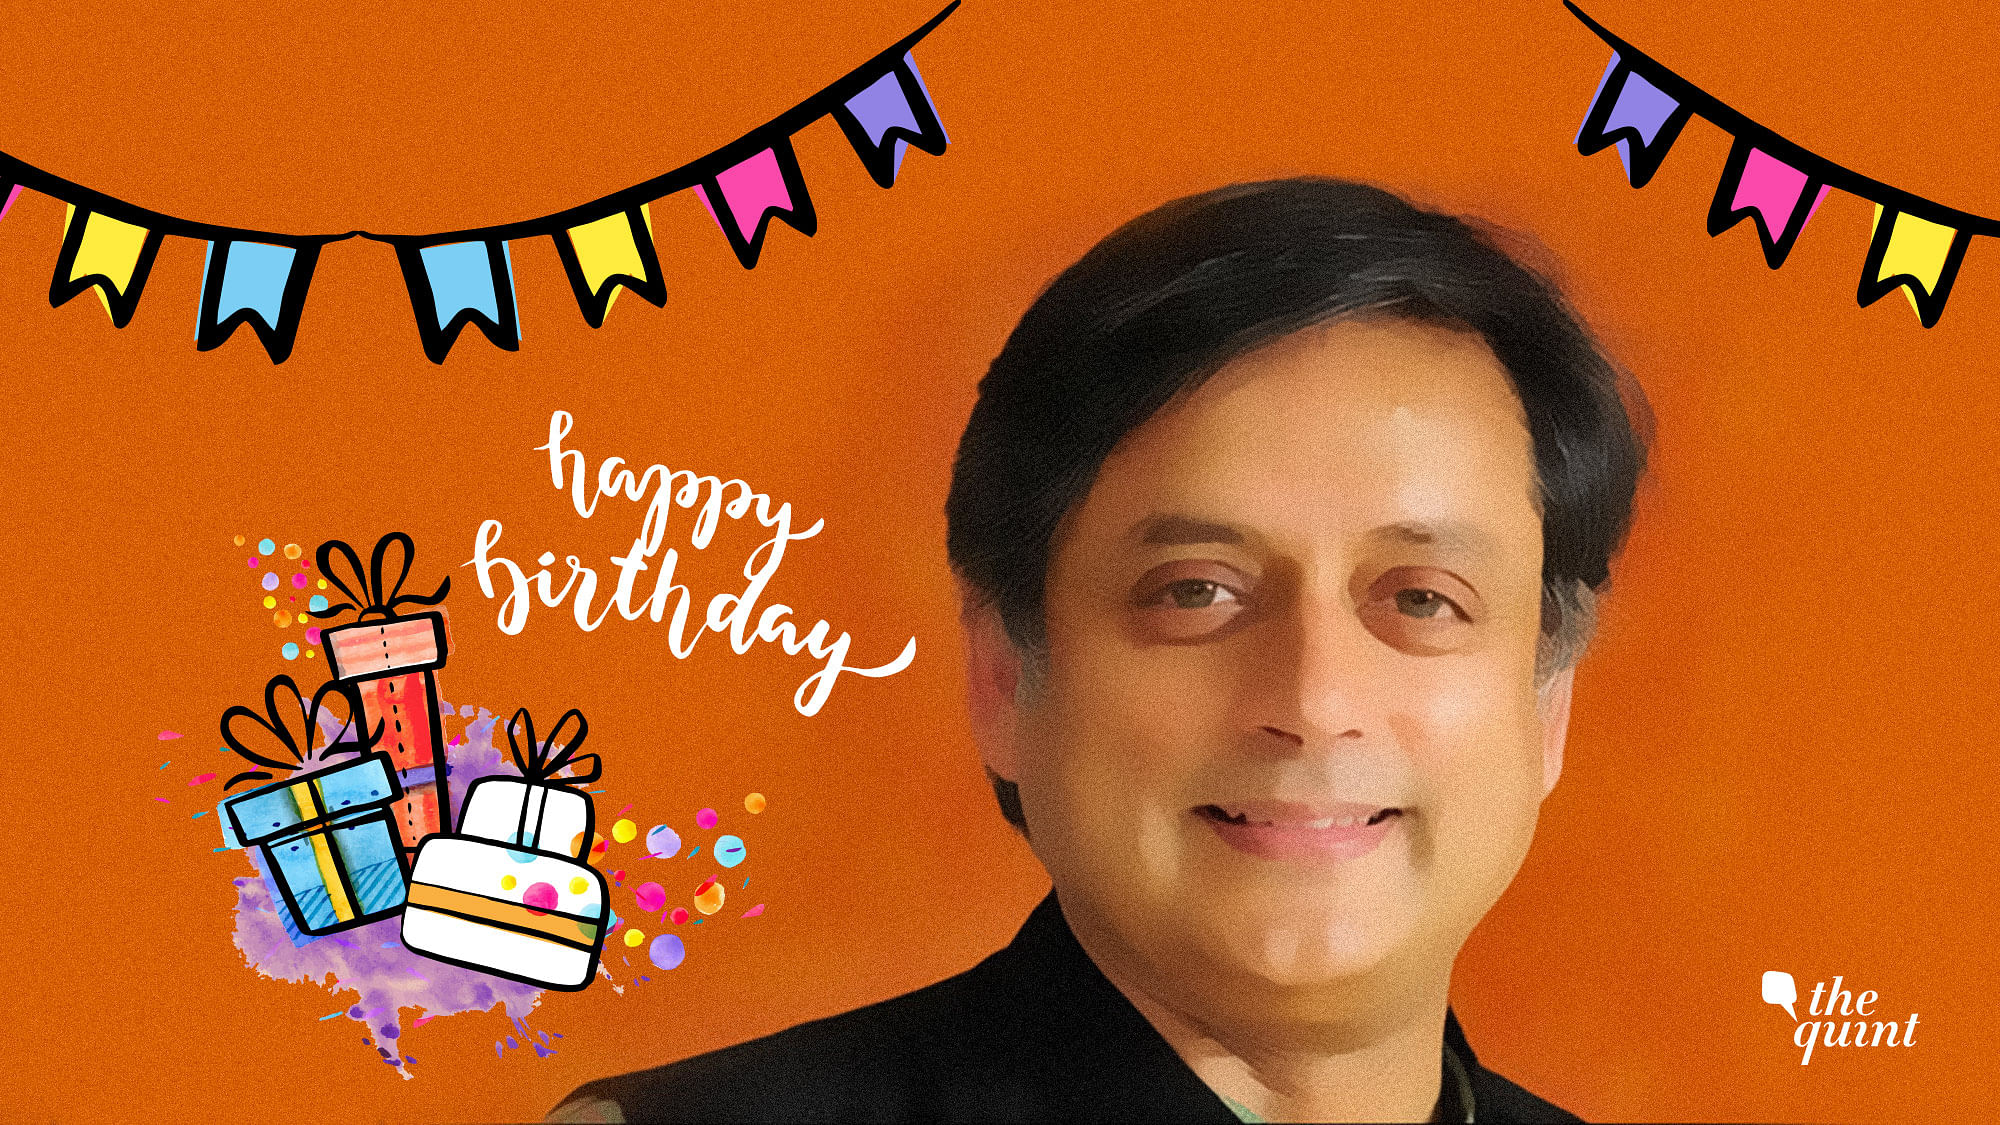 On the occasion of Dr Shashi Tharoor’s 62nd birthday, the palatial lodge from the British Era was decked to look its festive best.